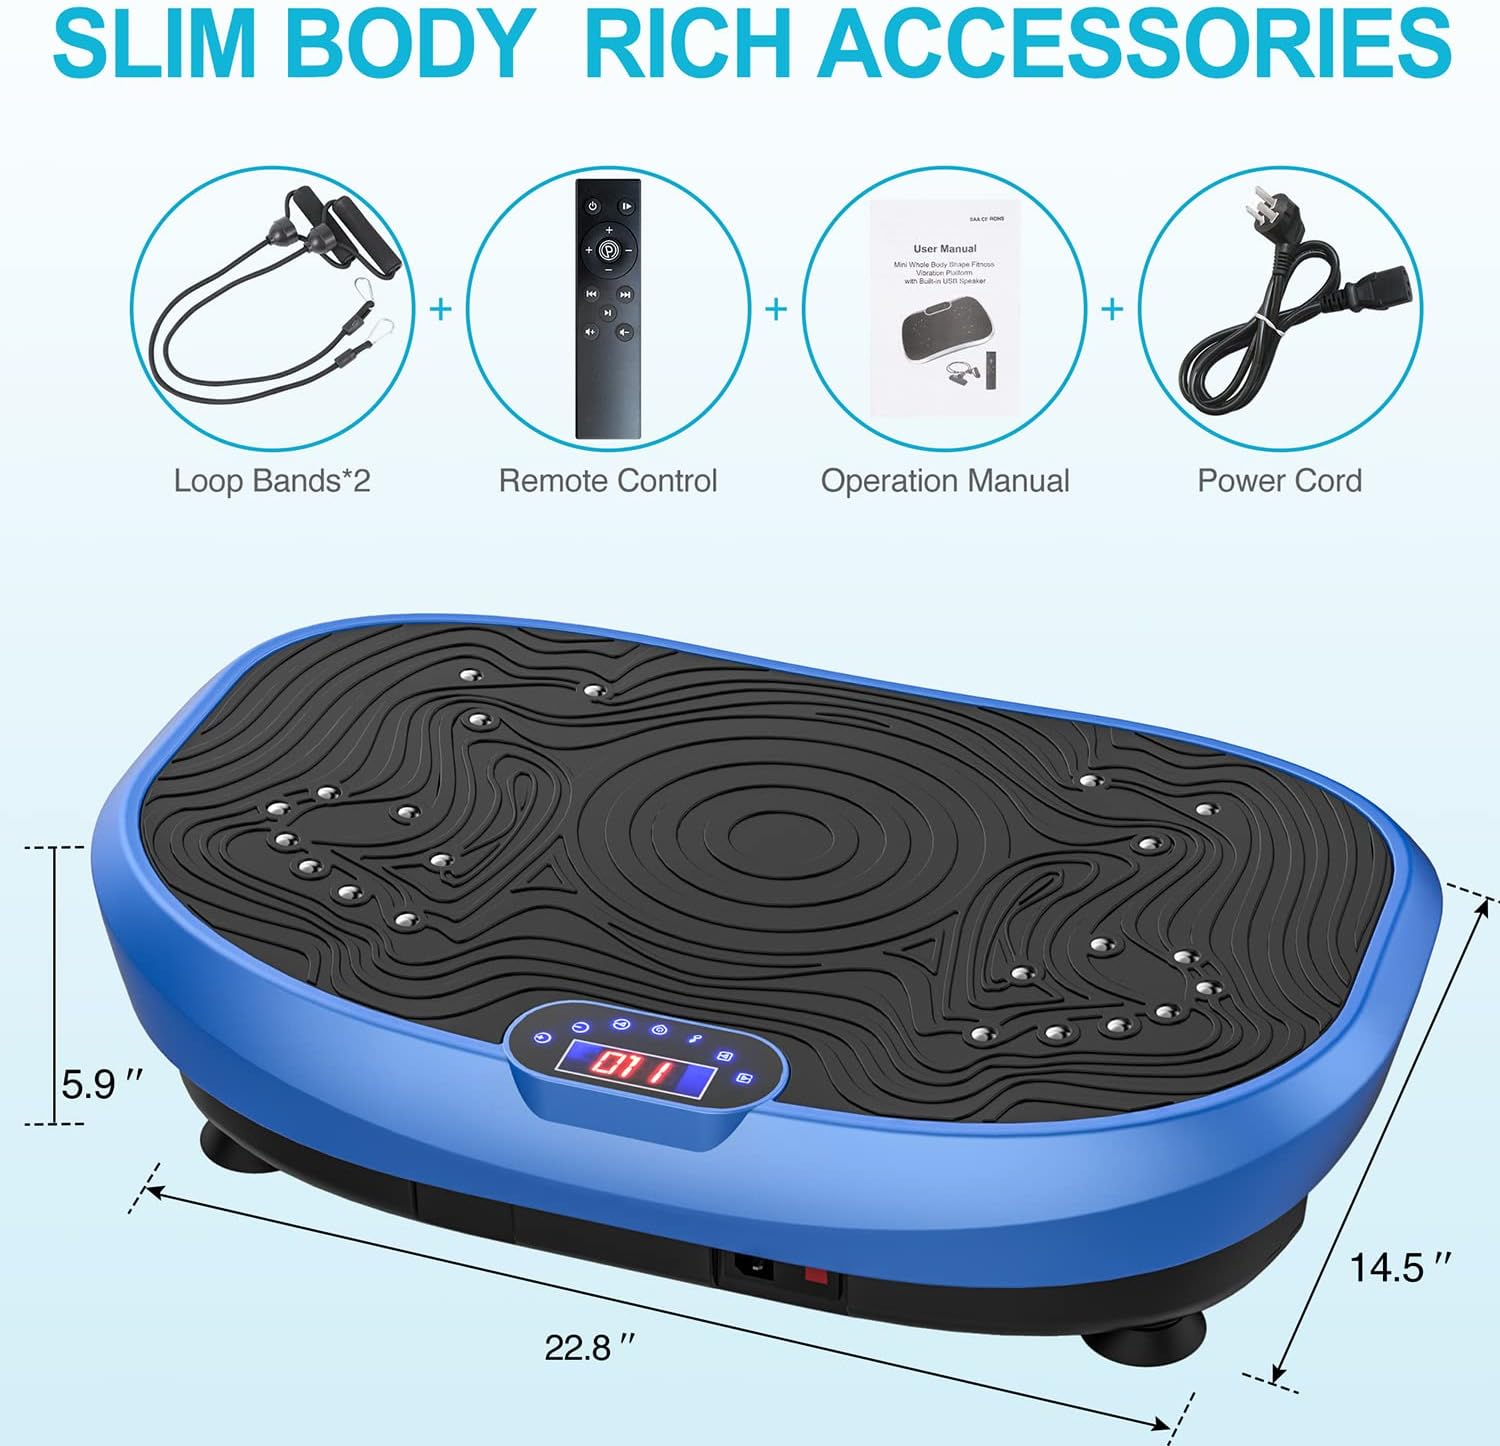 Vibration Plate Exercise Machine Whole Body Workout Vibrate Fitness Platform Lymphatic Drainage Machine for Weight Loss Shaping Toning Wellness Home Gyms Workout for Women Men